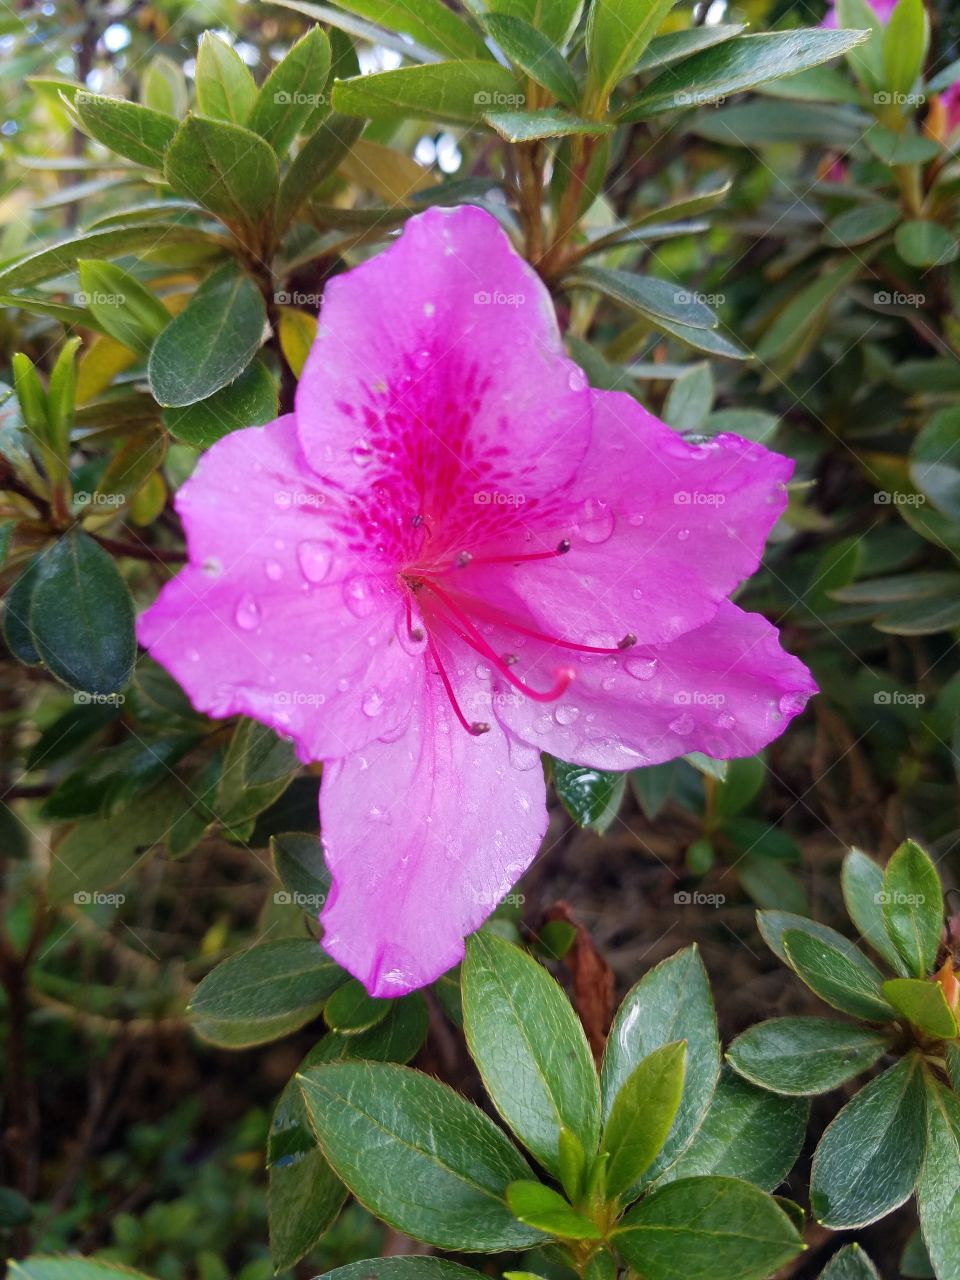 It rained and it poured, somehow this flower still managed to look beautiful.